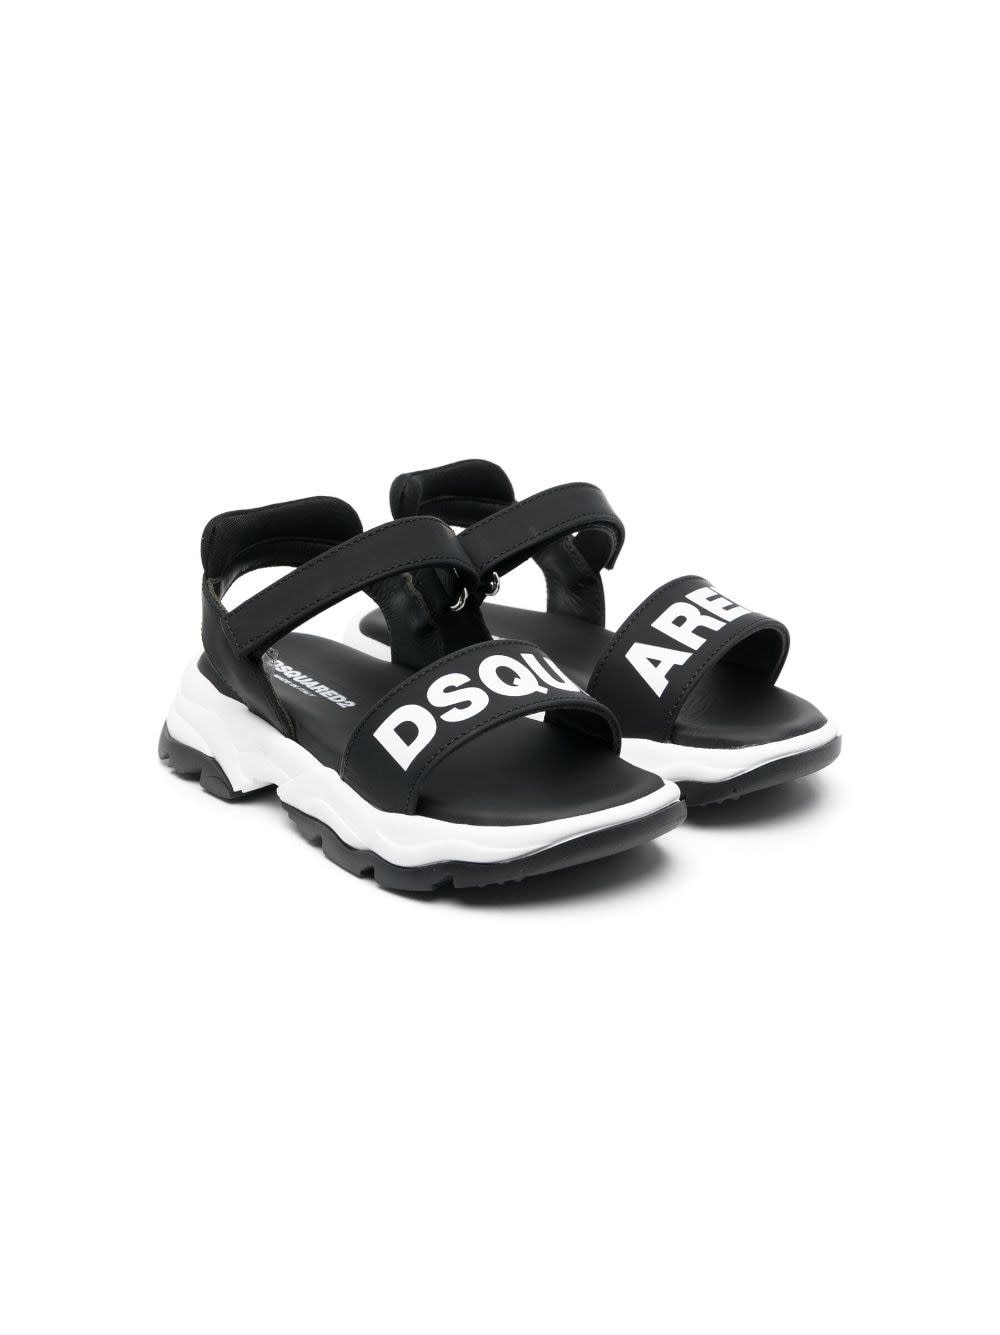 DSQUARED2 SANDALS WITH LOGO